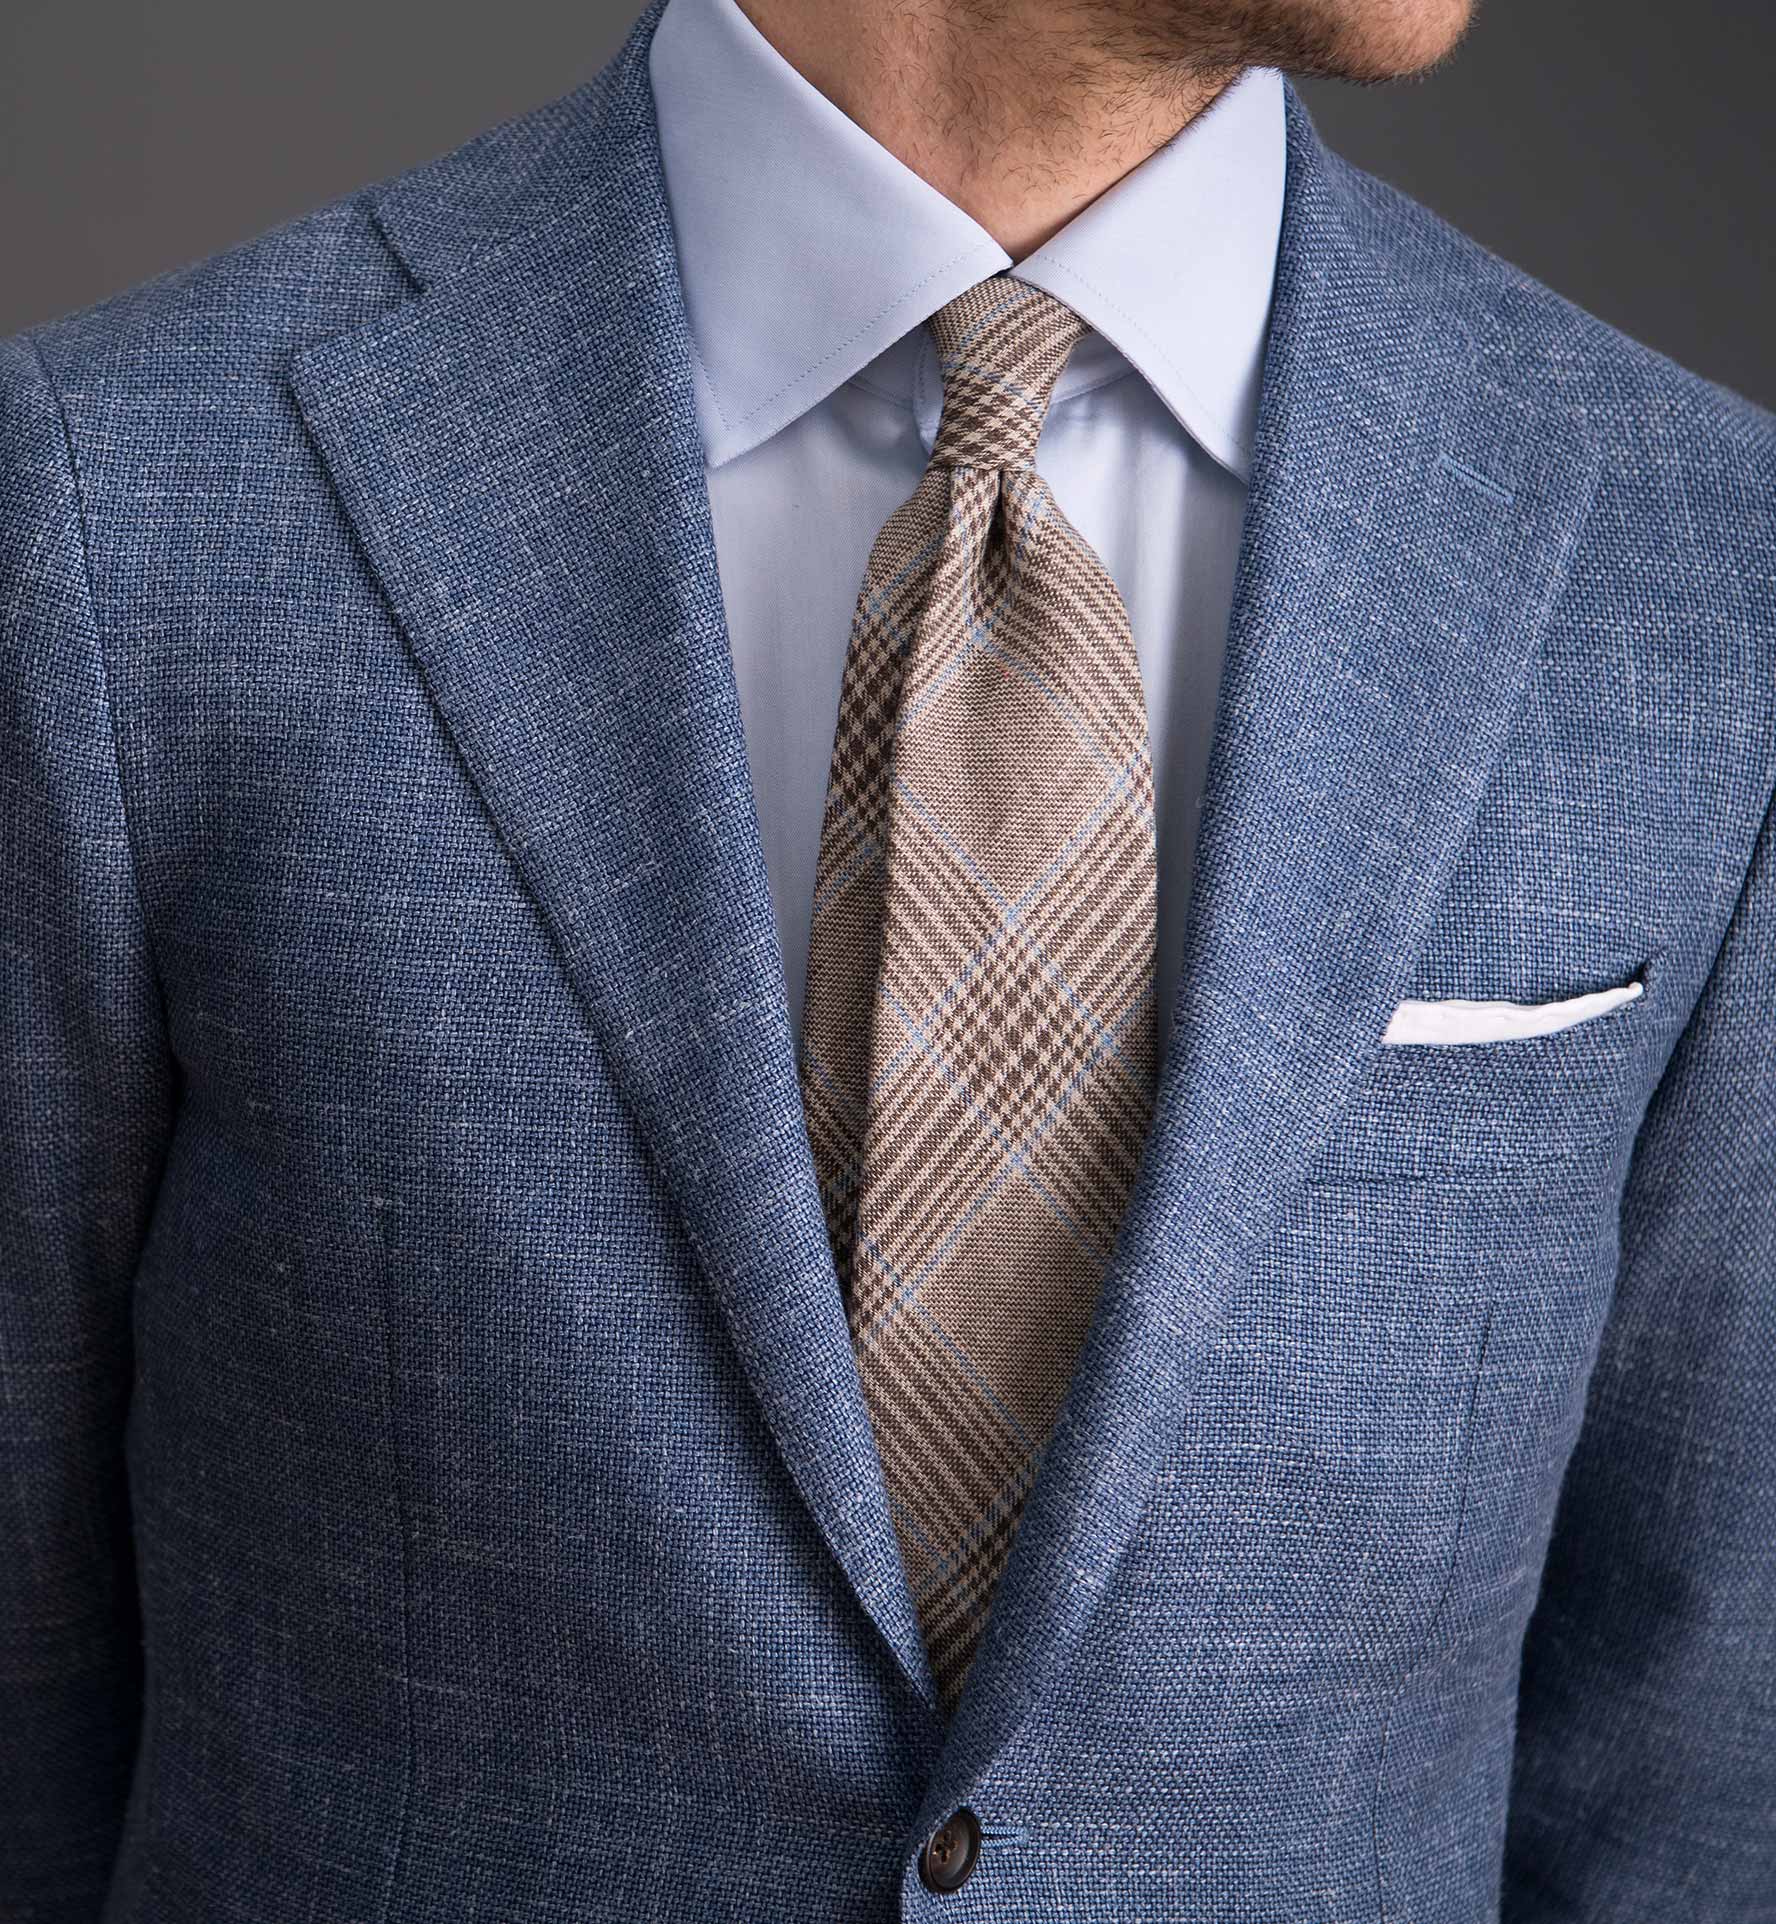 Beige and Light Blue Prince of Wales Linen Tie by Proper Cloth